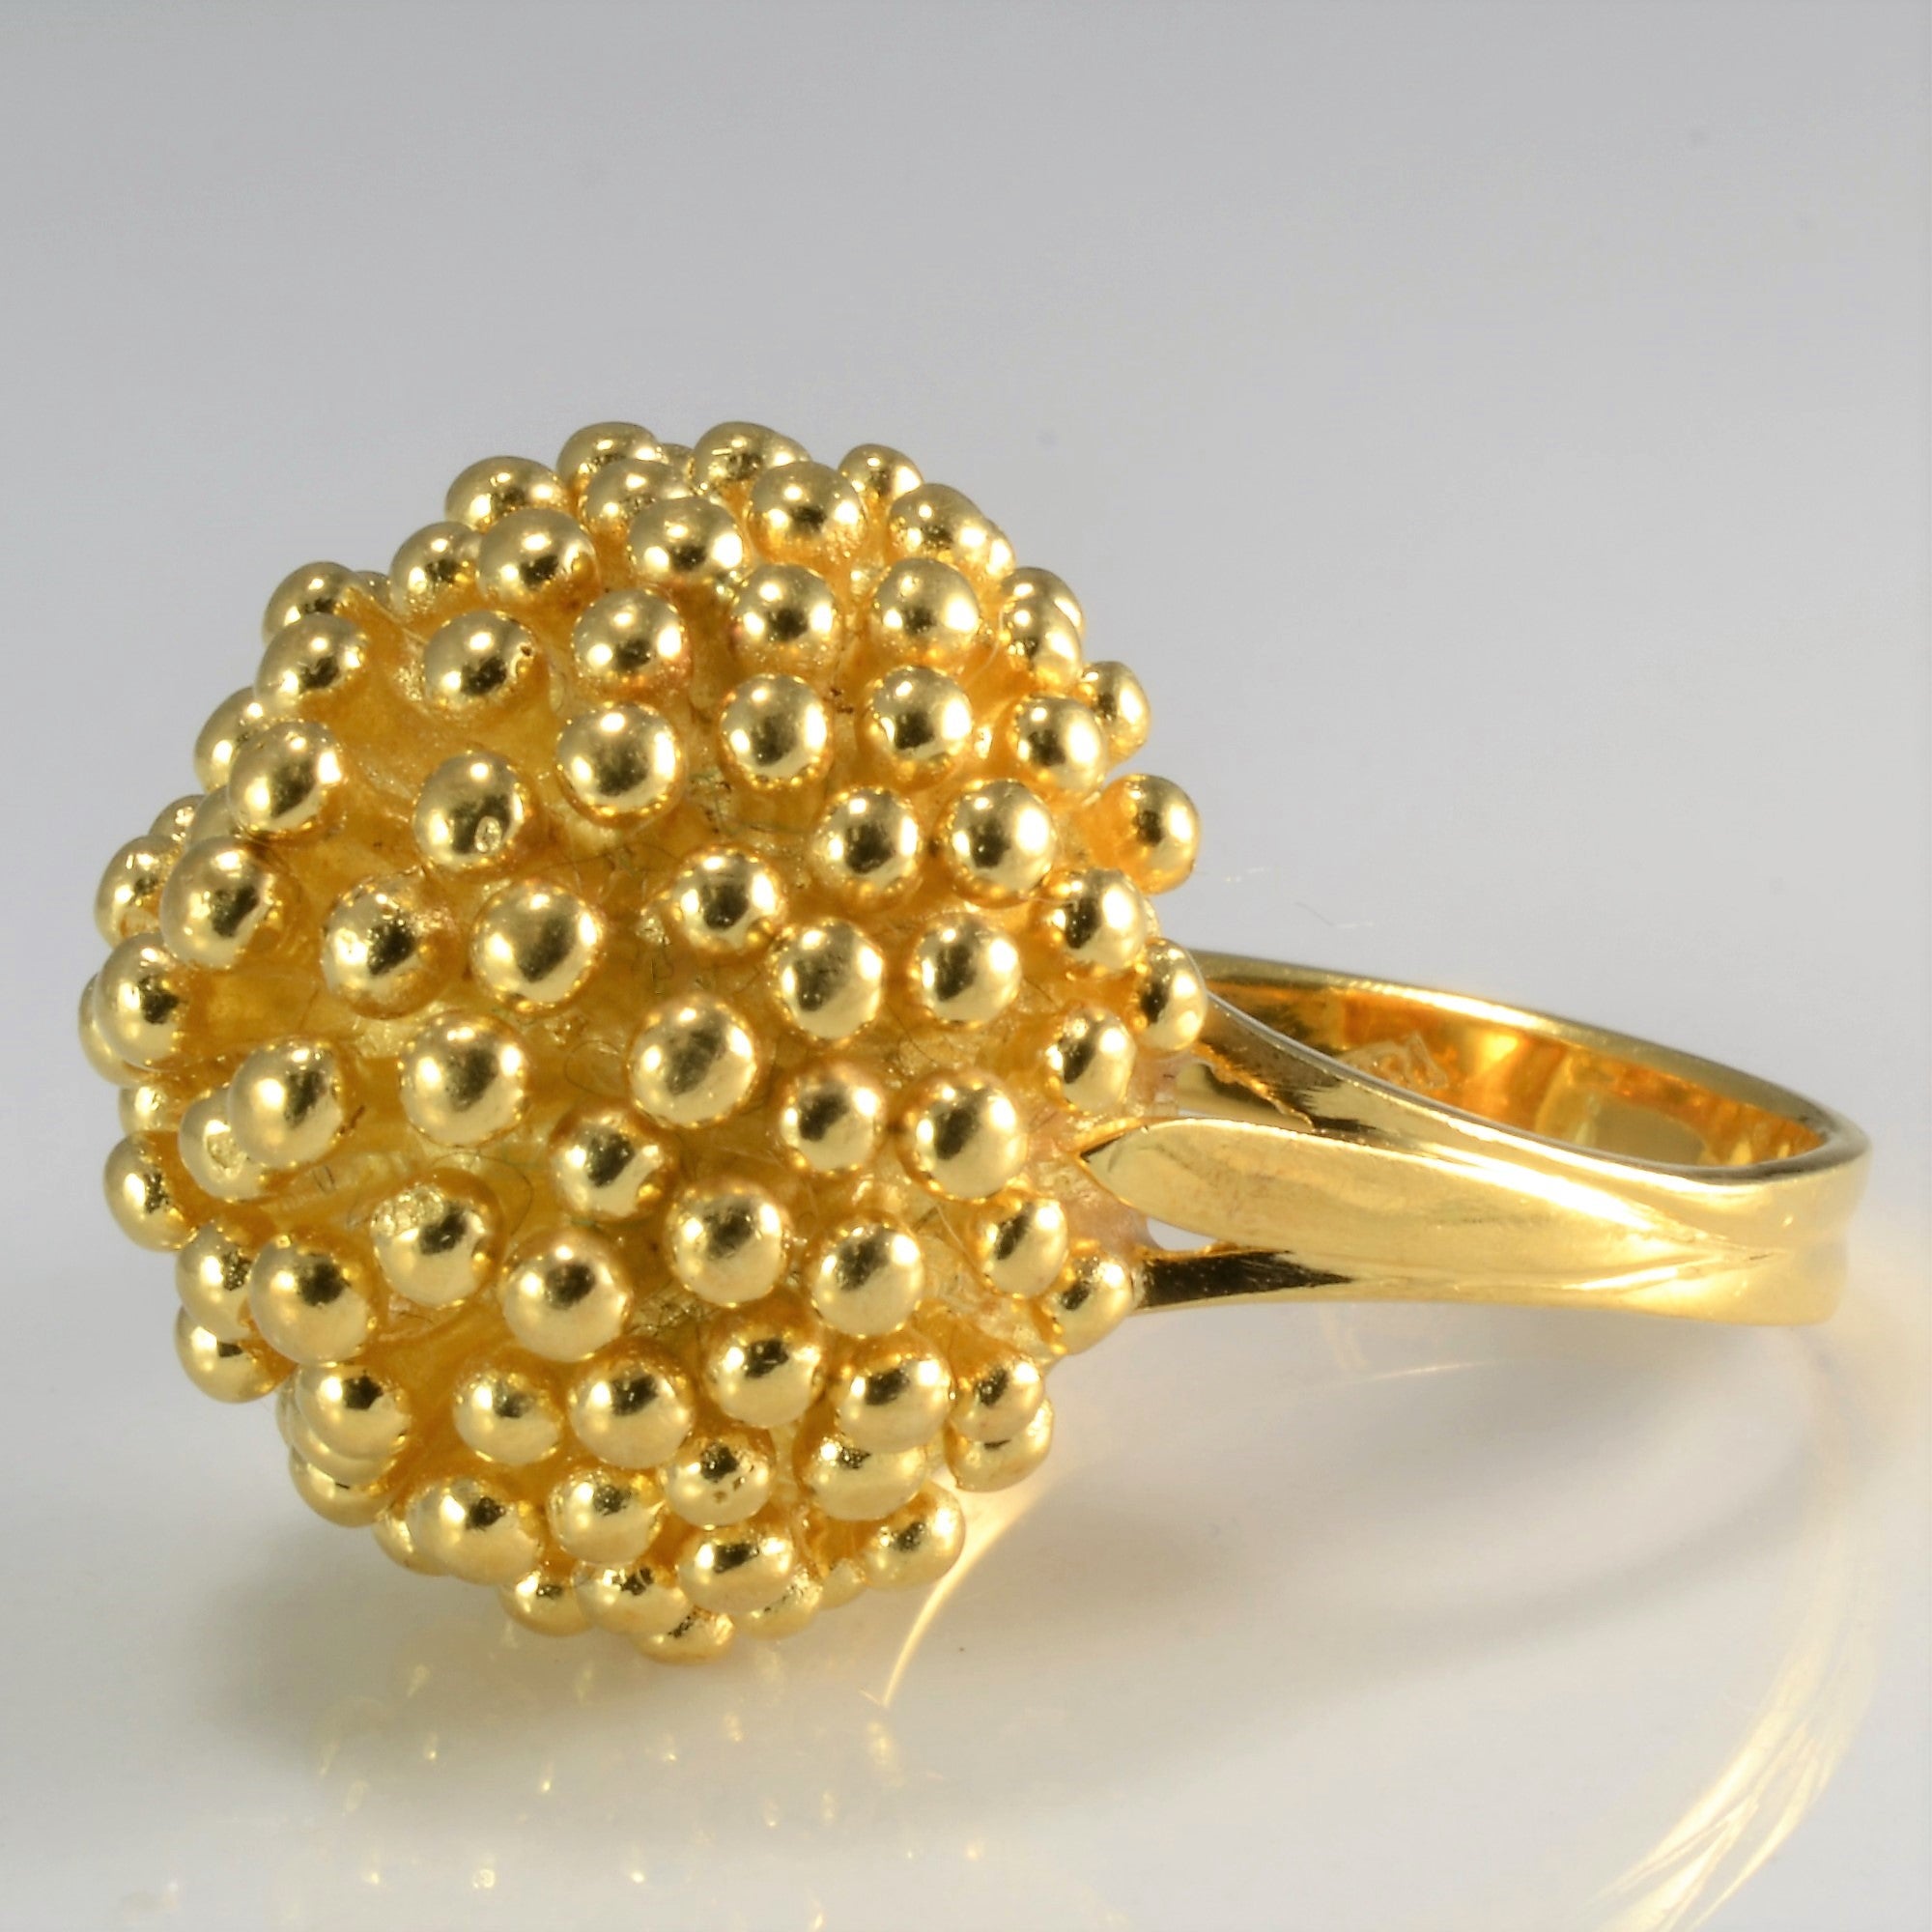 Heavy Cluster Beads Dome Ring | SZ 8.5 |